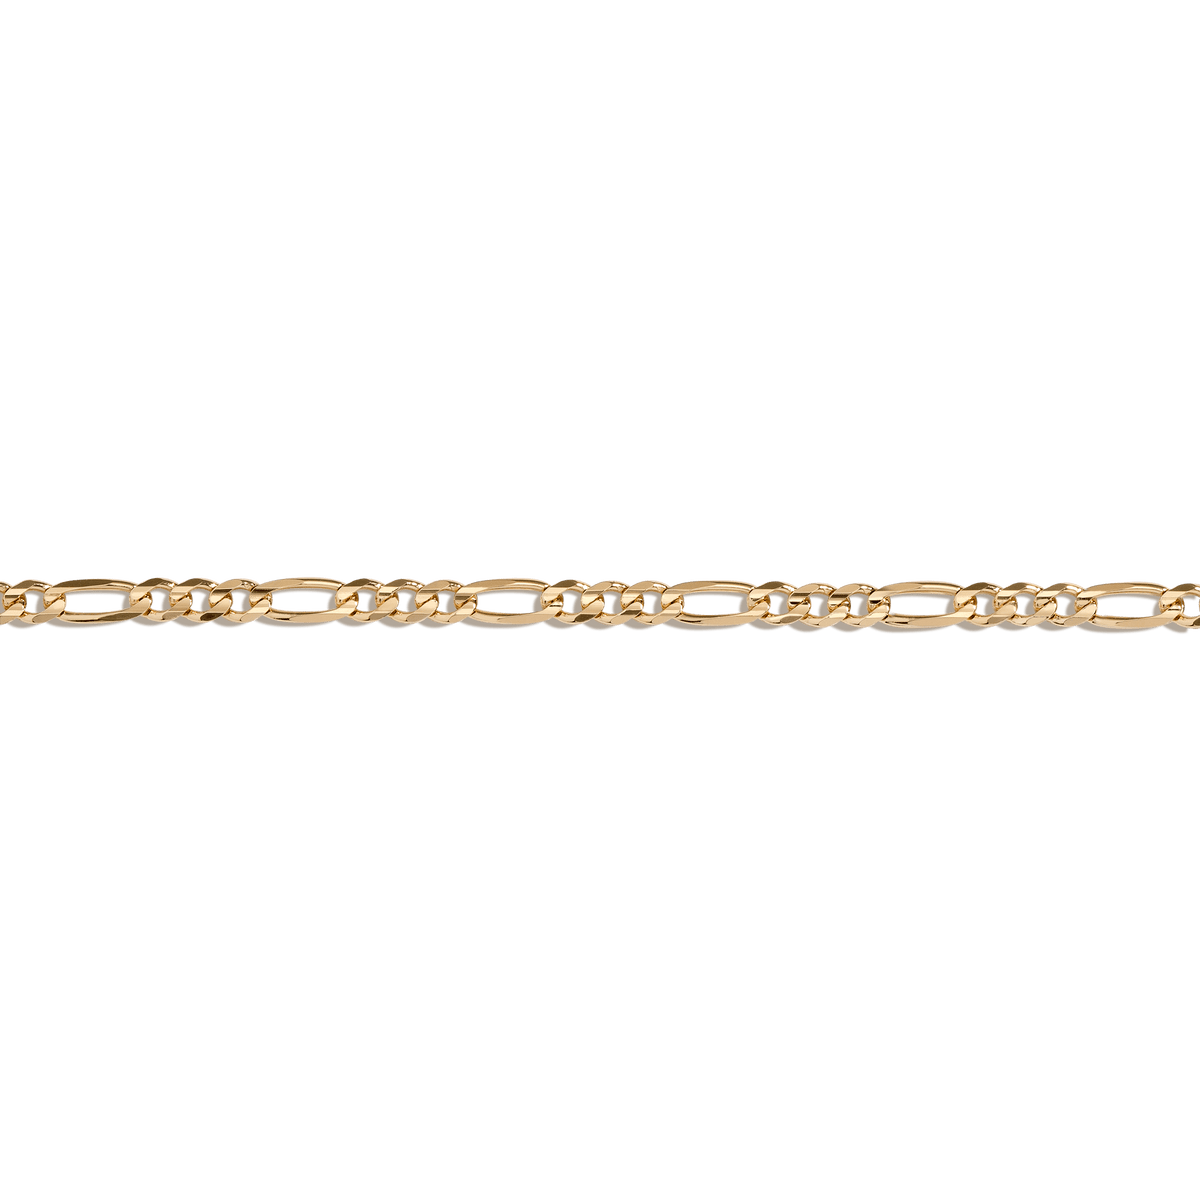 14K Large Link Open Figaro Chain, 14K Yellow